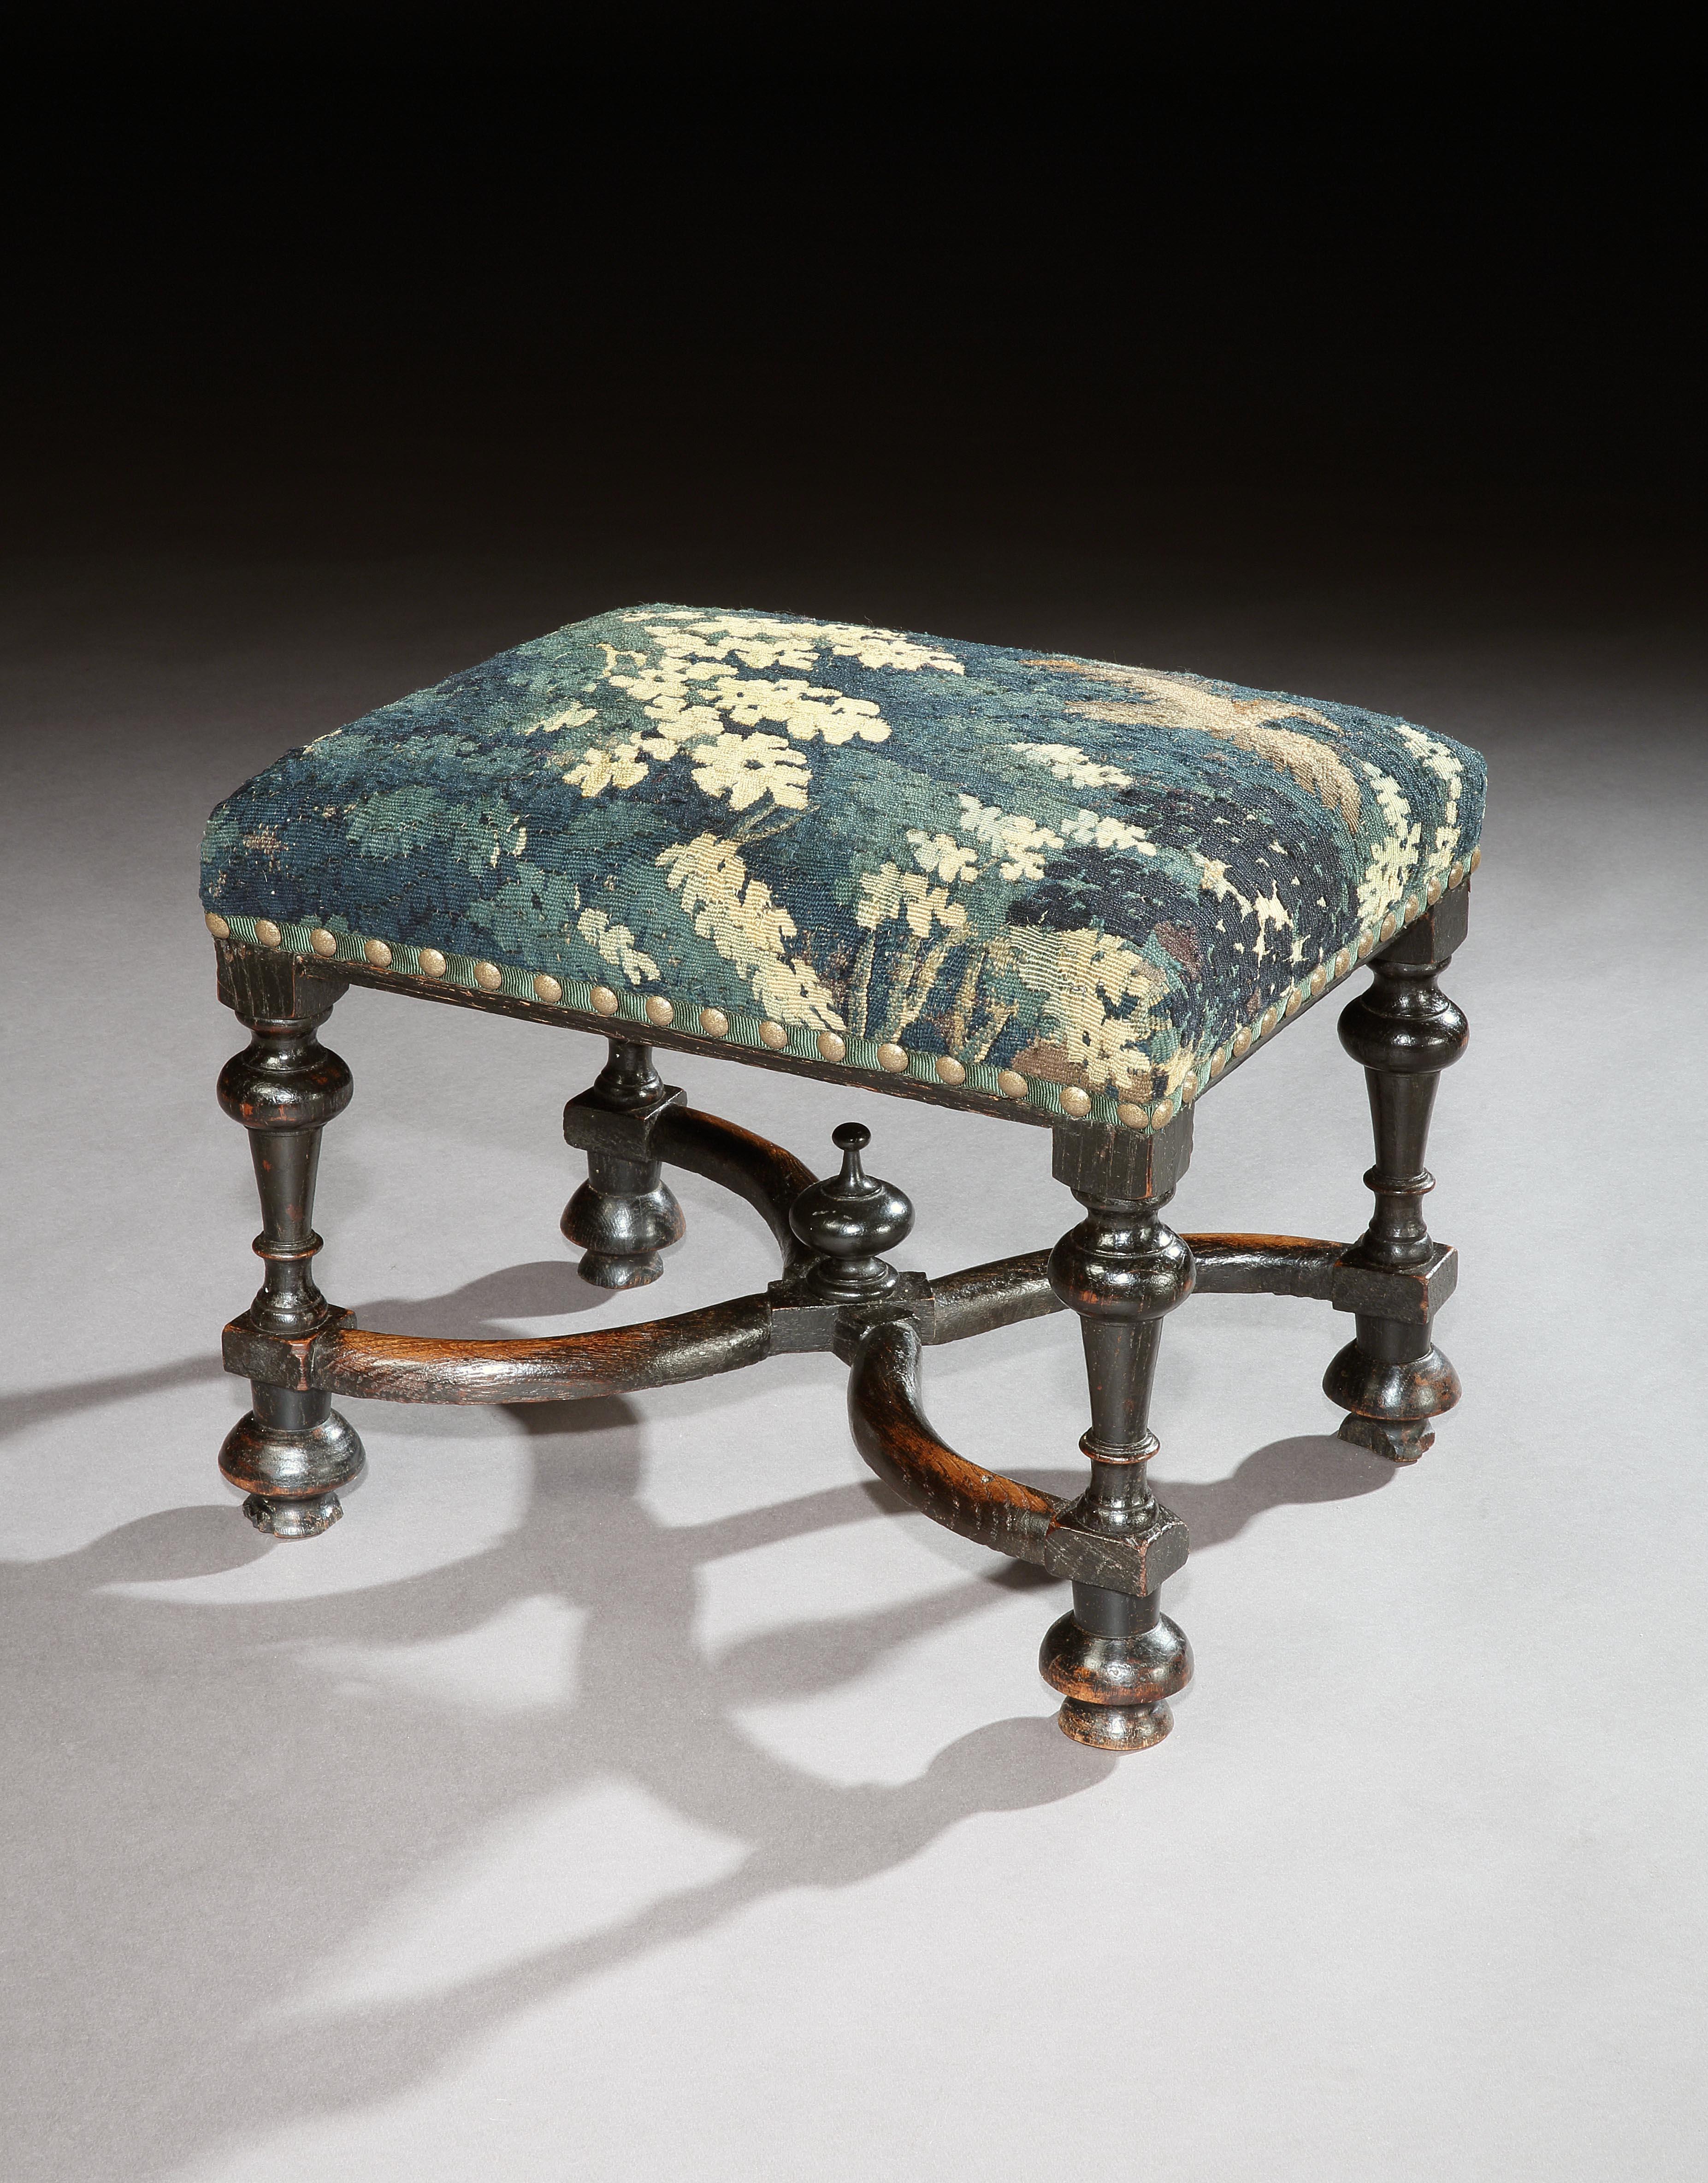 A rare, late 17th century. ‘X’ stretchered, ebonised, oak stool upholstered in 17th century verdure tapestry
Unusual simulating ebony which was phenomenally expensive and only found in Royal and aristocratic collections at this time
This stool is